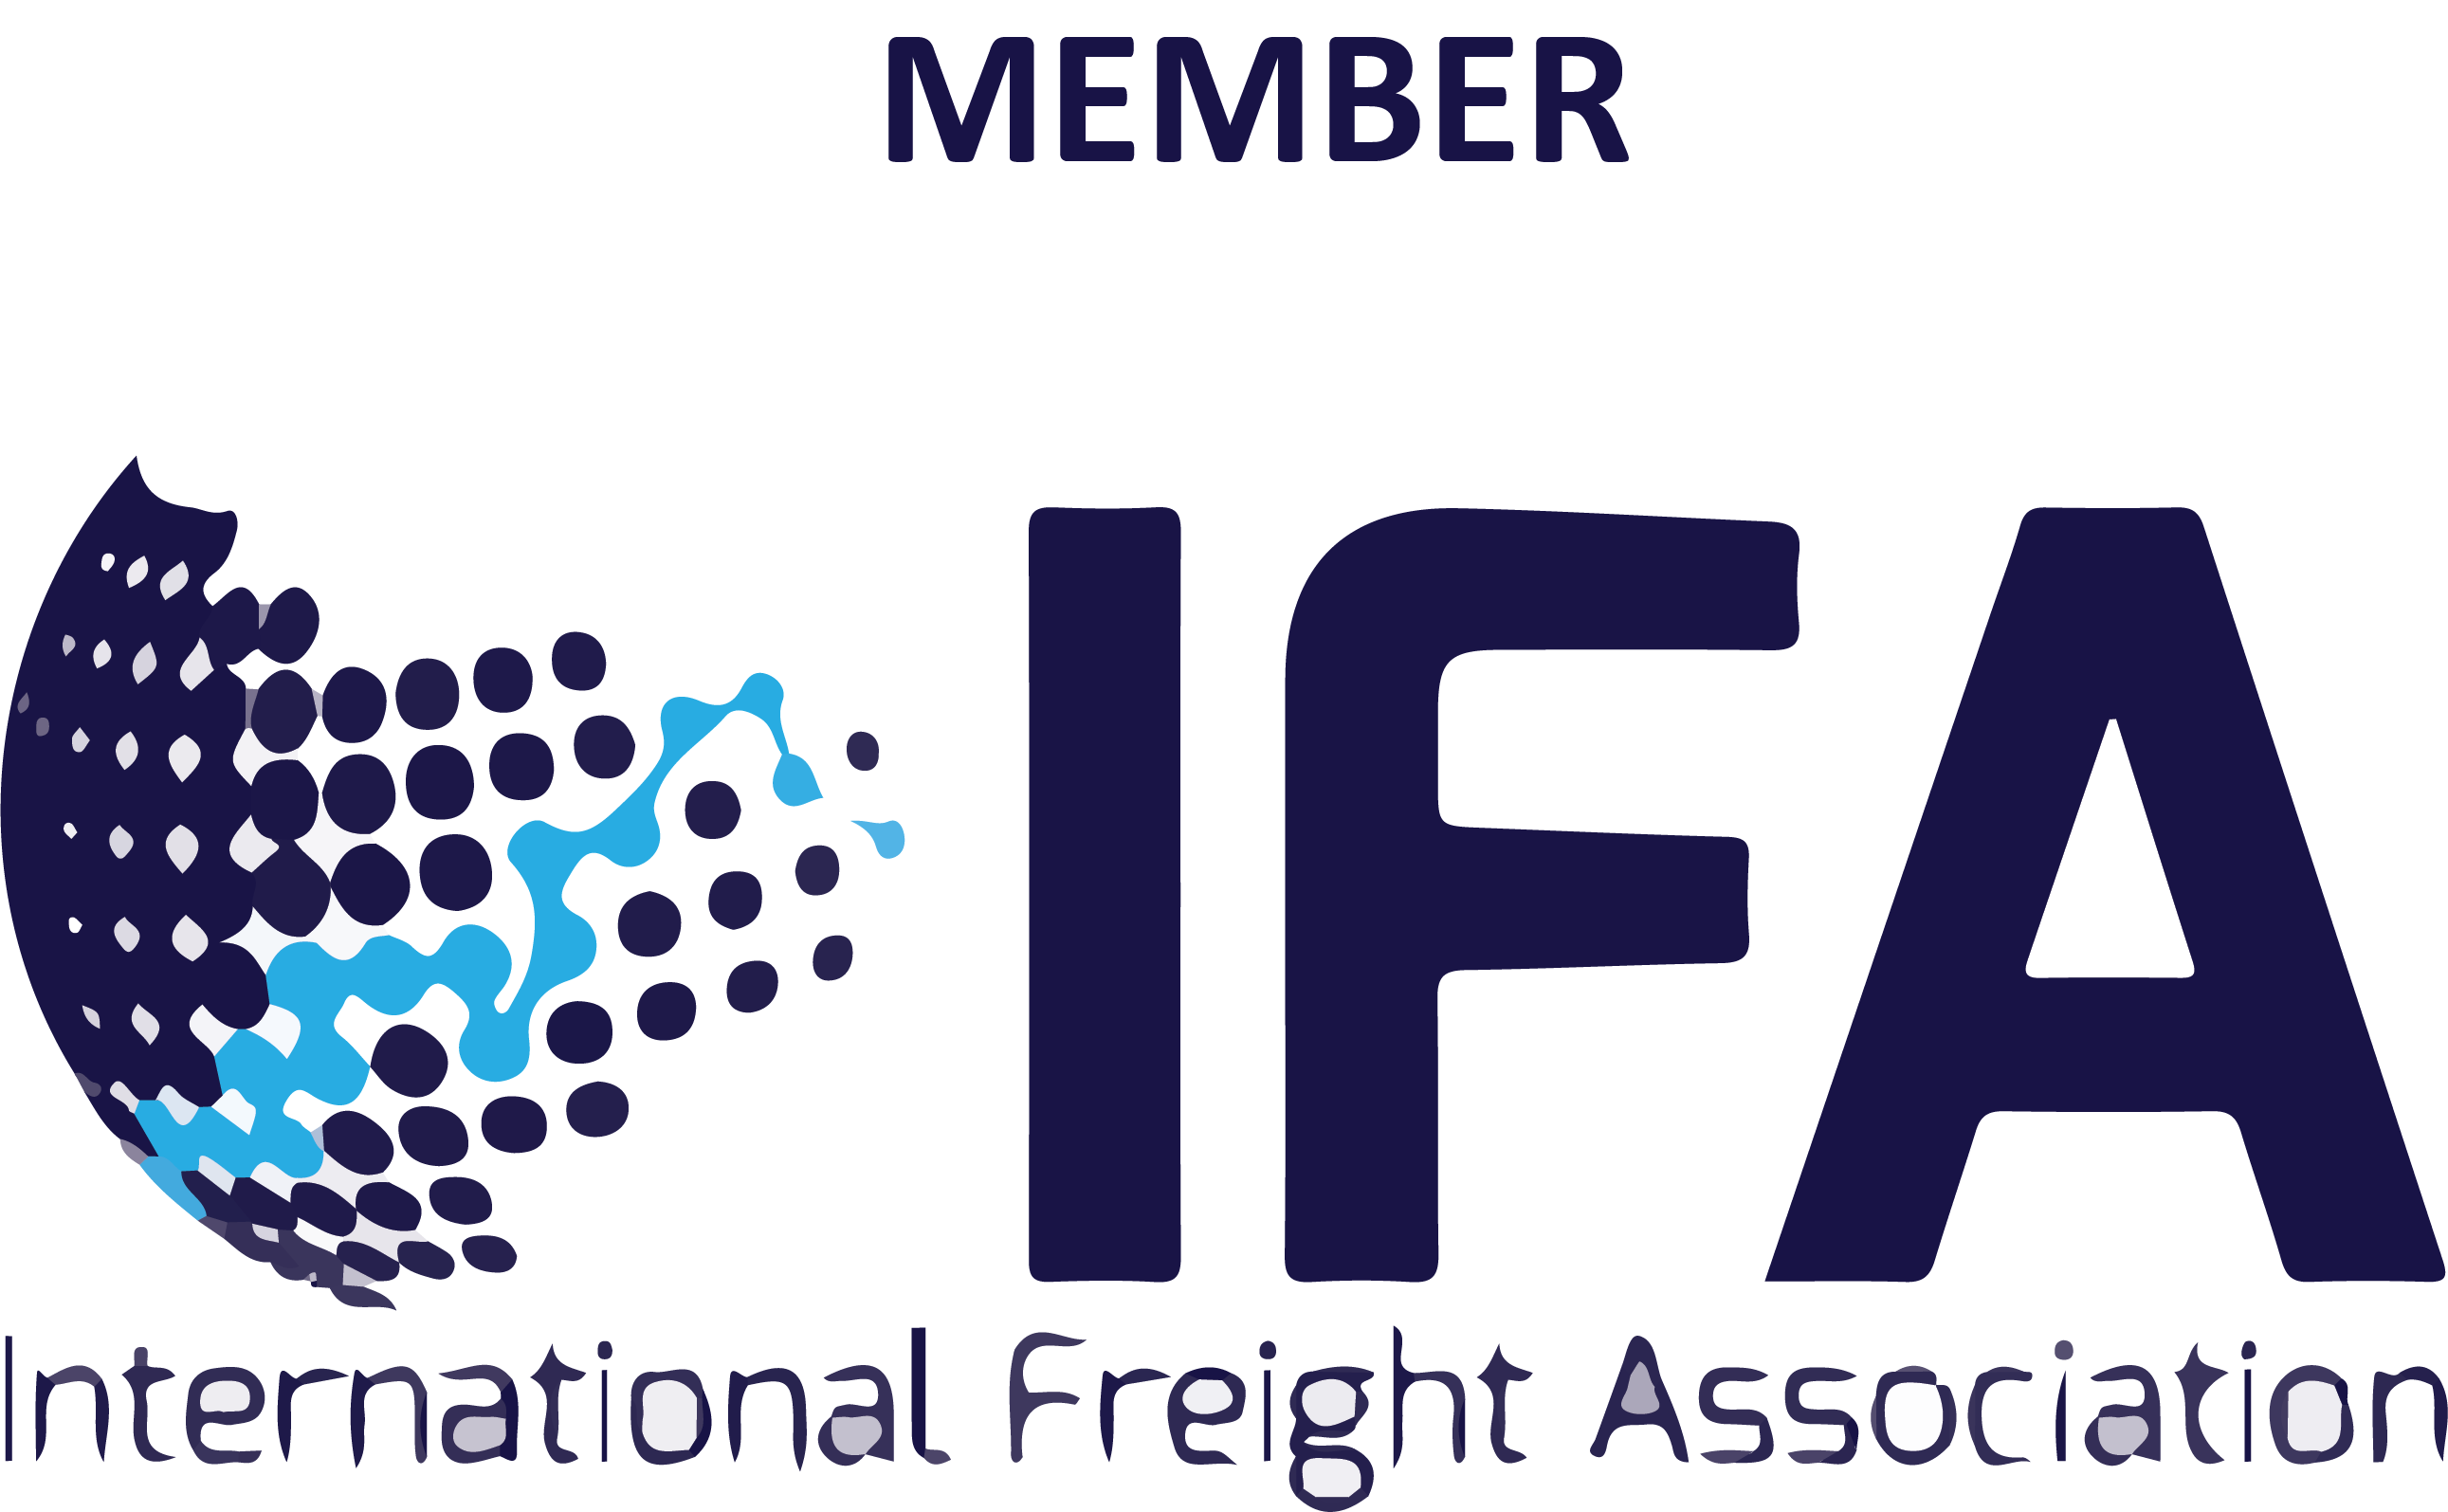 SLL is a trusted member of the international freight association.